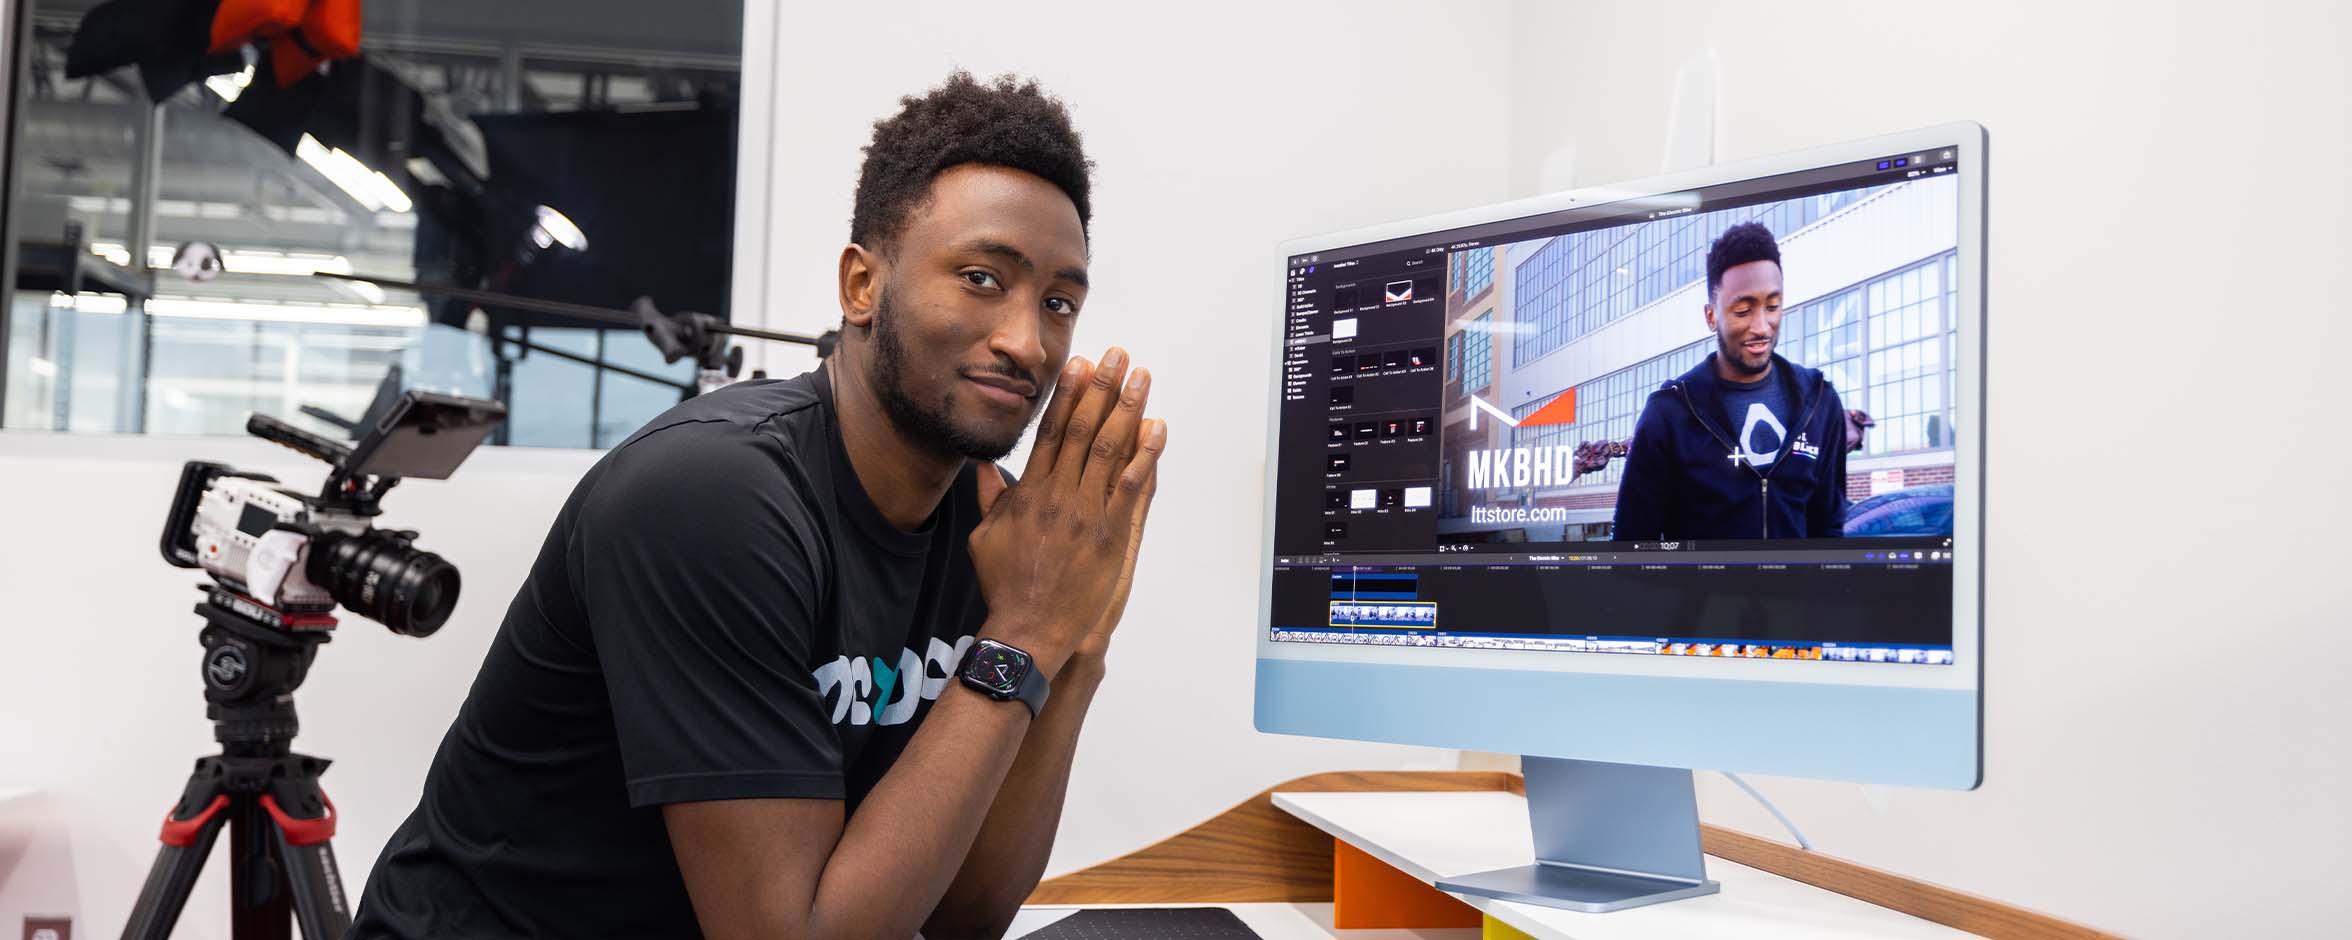 MKBHD, top tech YouTuber, shares his video-editing tricks in a plugin released by MotionVFX